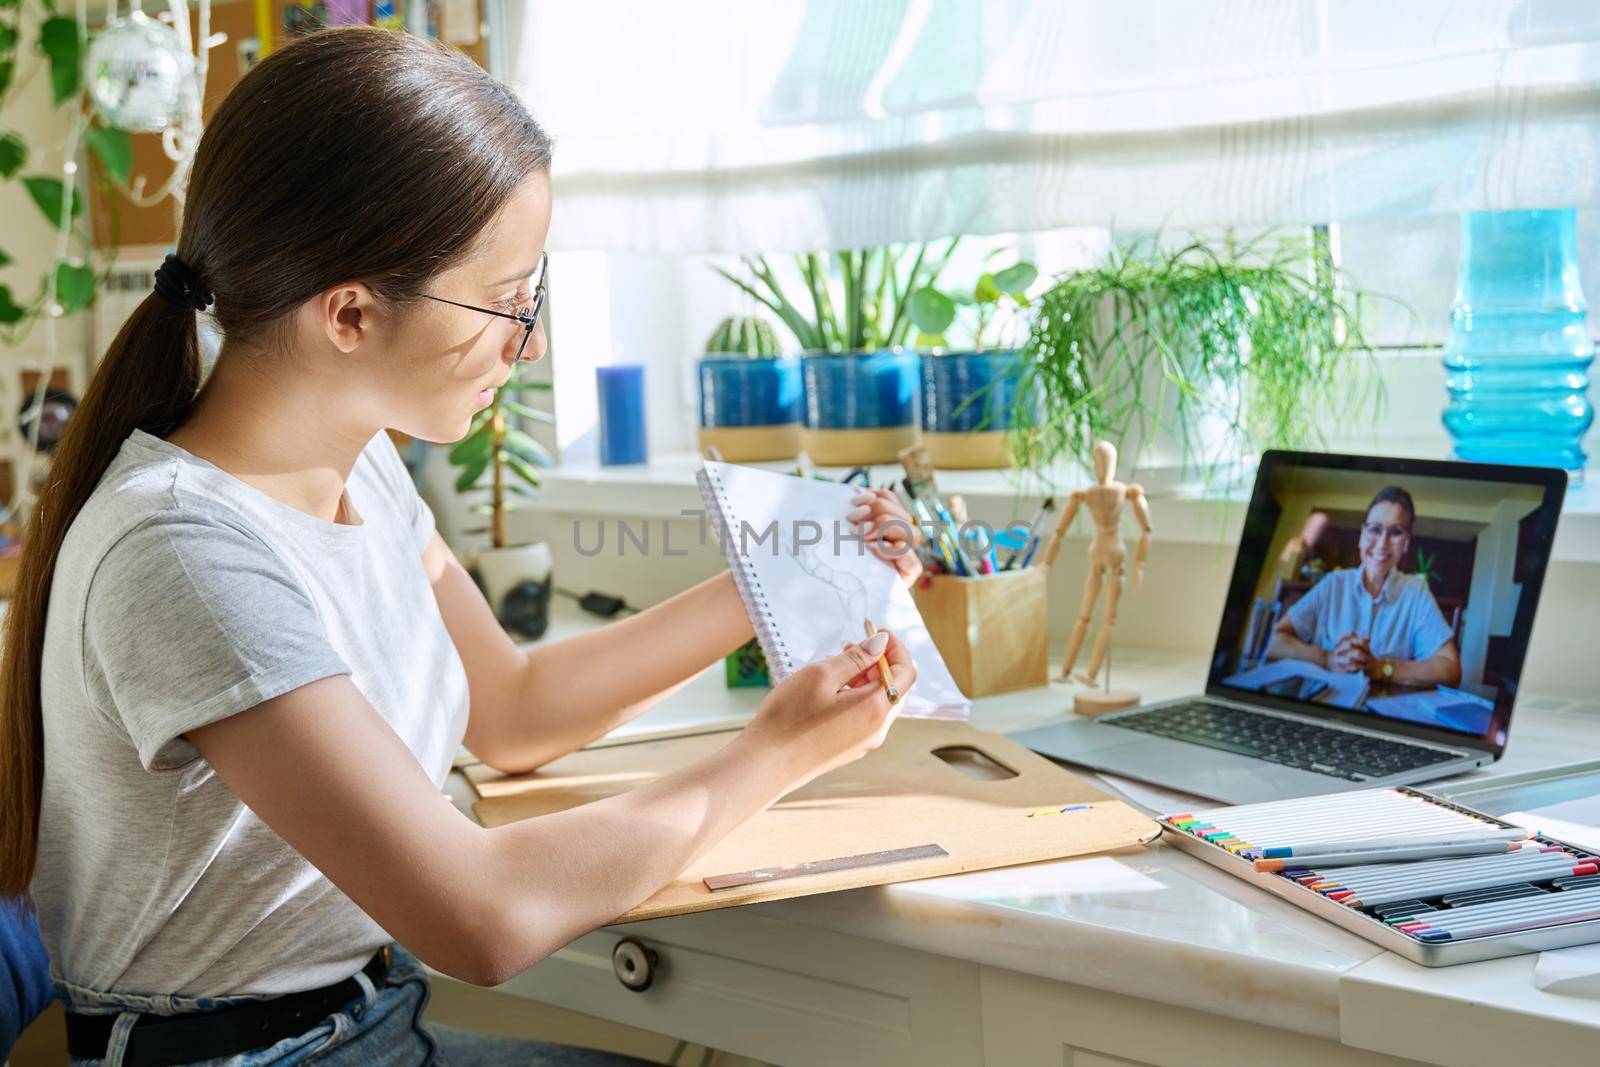 Online drawing lesson, teenage girl having video call conference chat with teacher sitting at table at home. Young creative art student. Creativity technology education e-learning adolescence concept